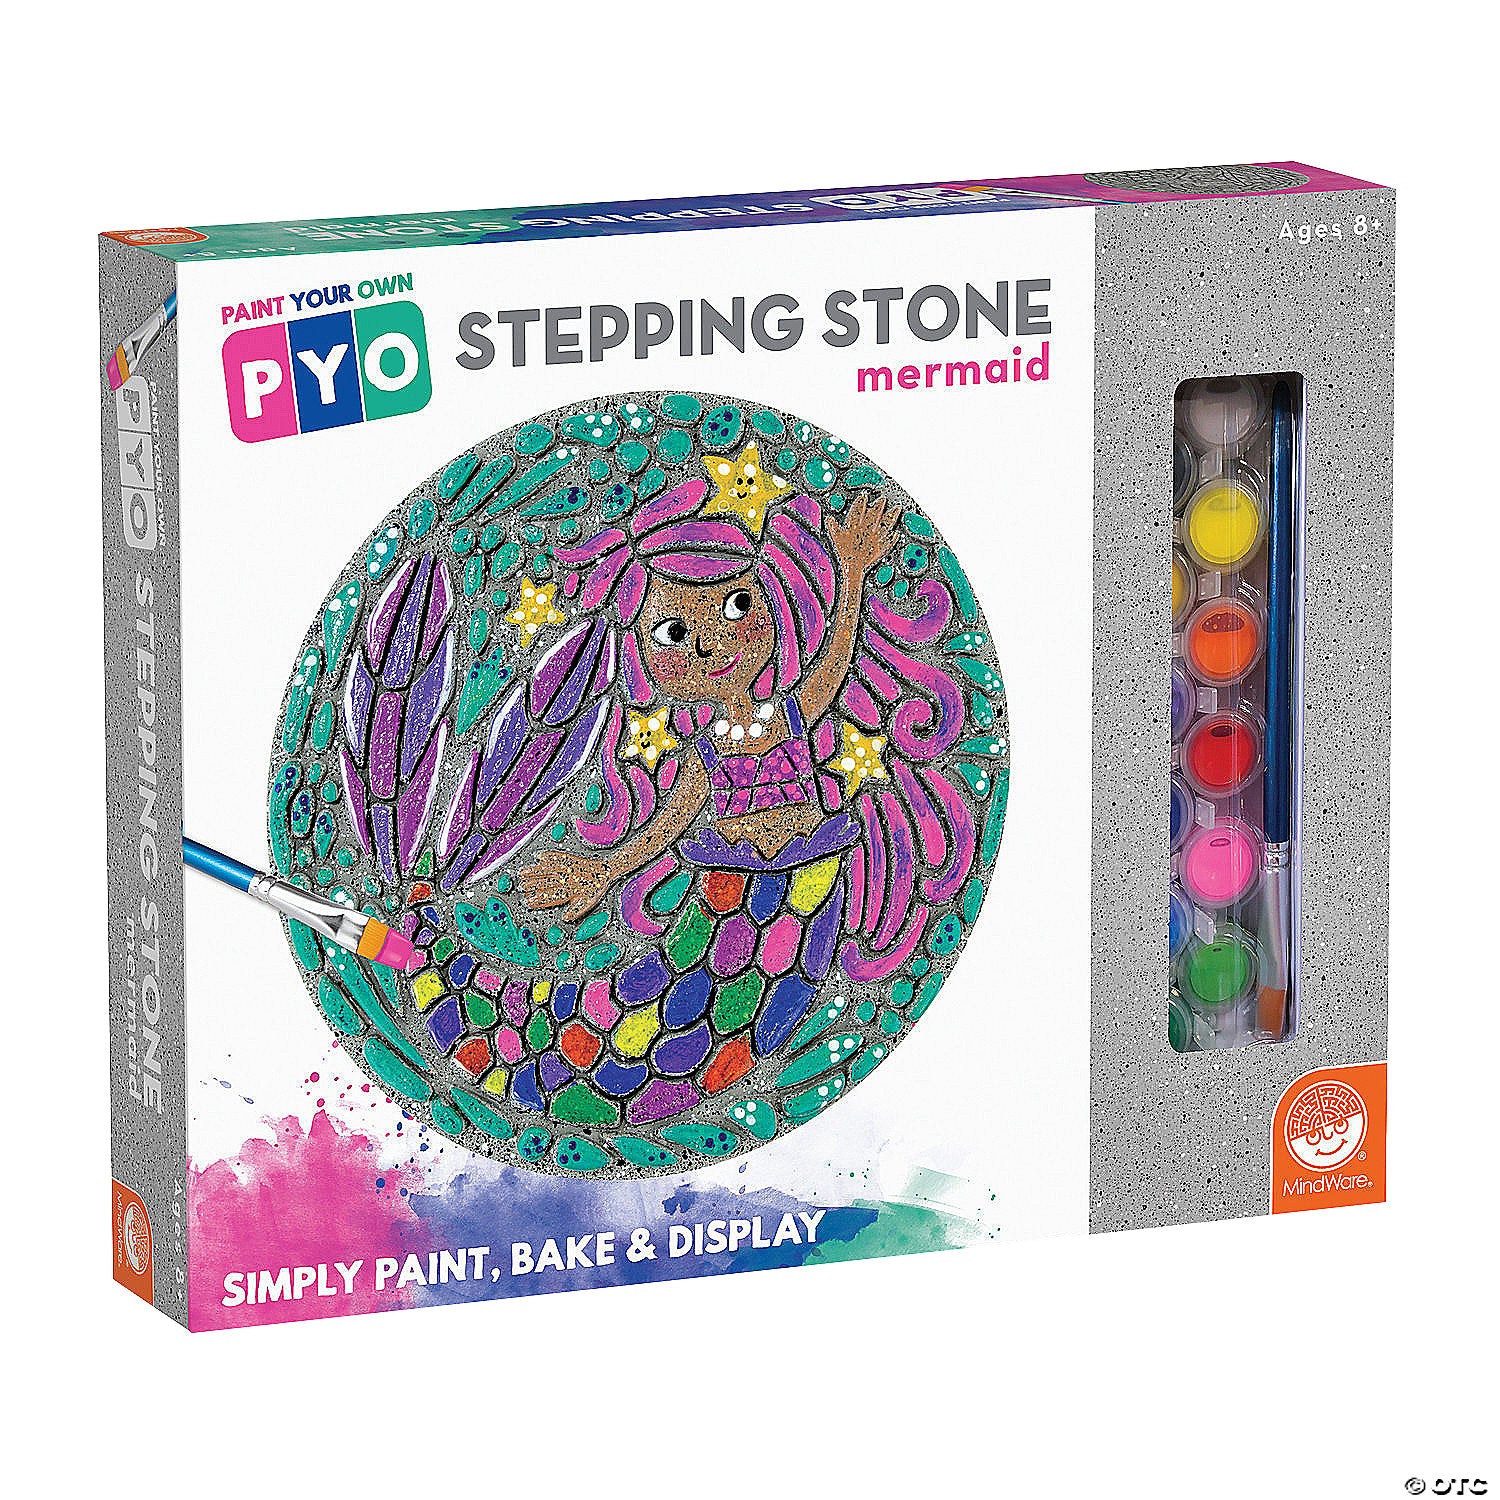 Paint Your Own Stepping Stone: Mermaid by Mindware #14255780AC4222